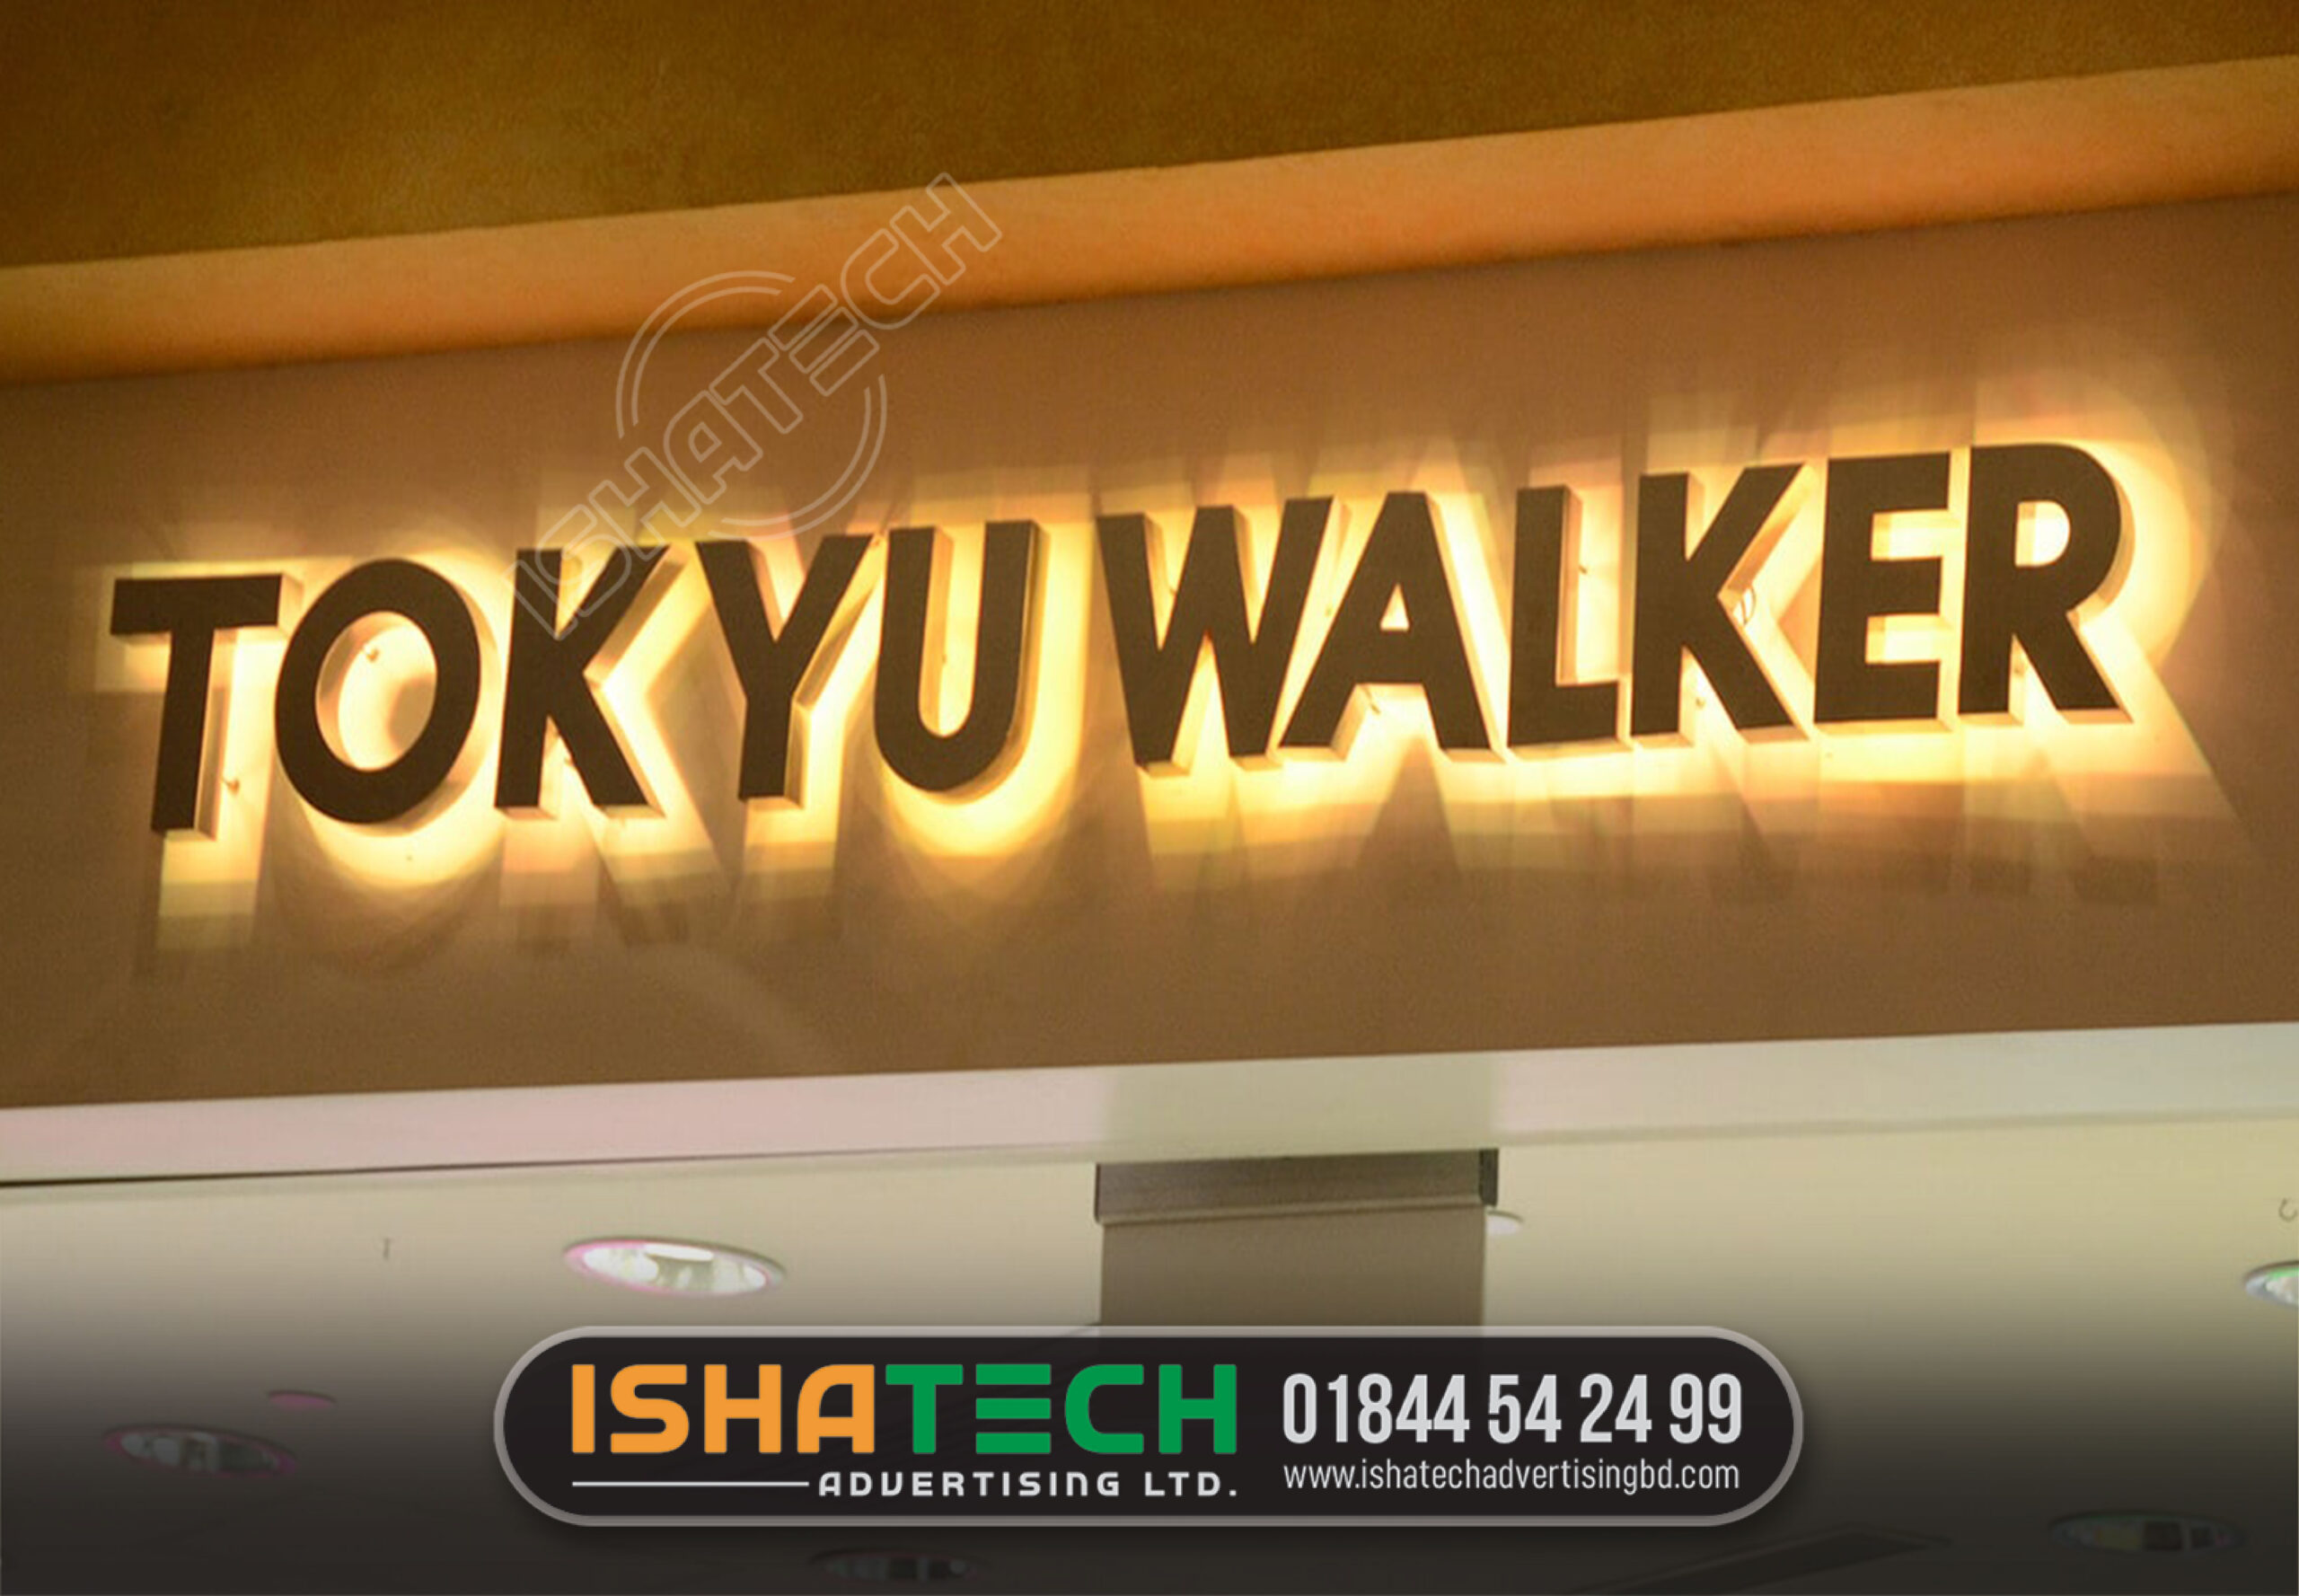 TOKYU WALKER SS BACKLIGHT LETTER SIGNAGE BY ISHATECH ADVERTISING LTD. 3D LED Backlit Signs With Painted Stainless Steel Letter